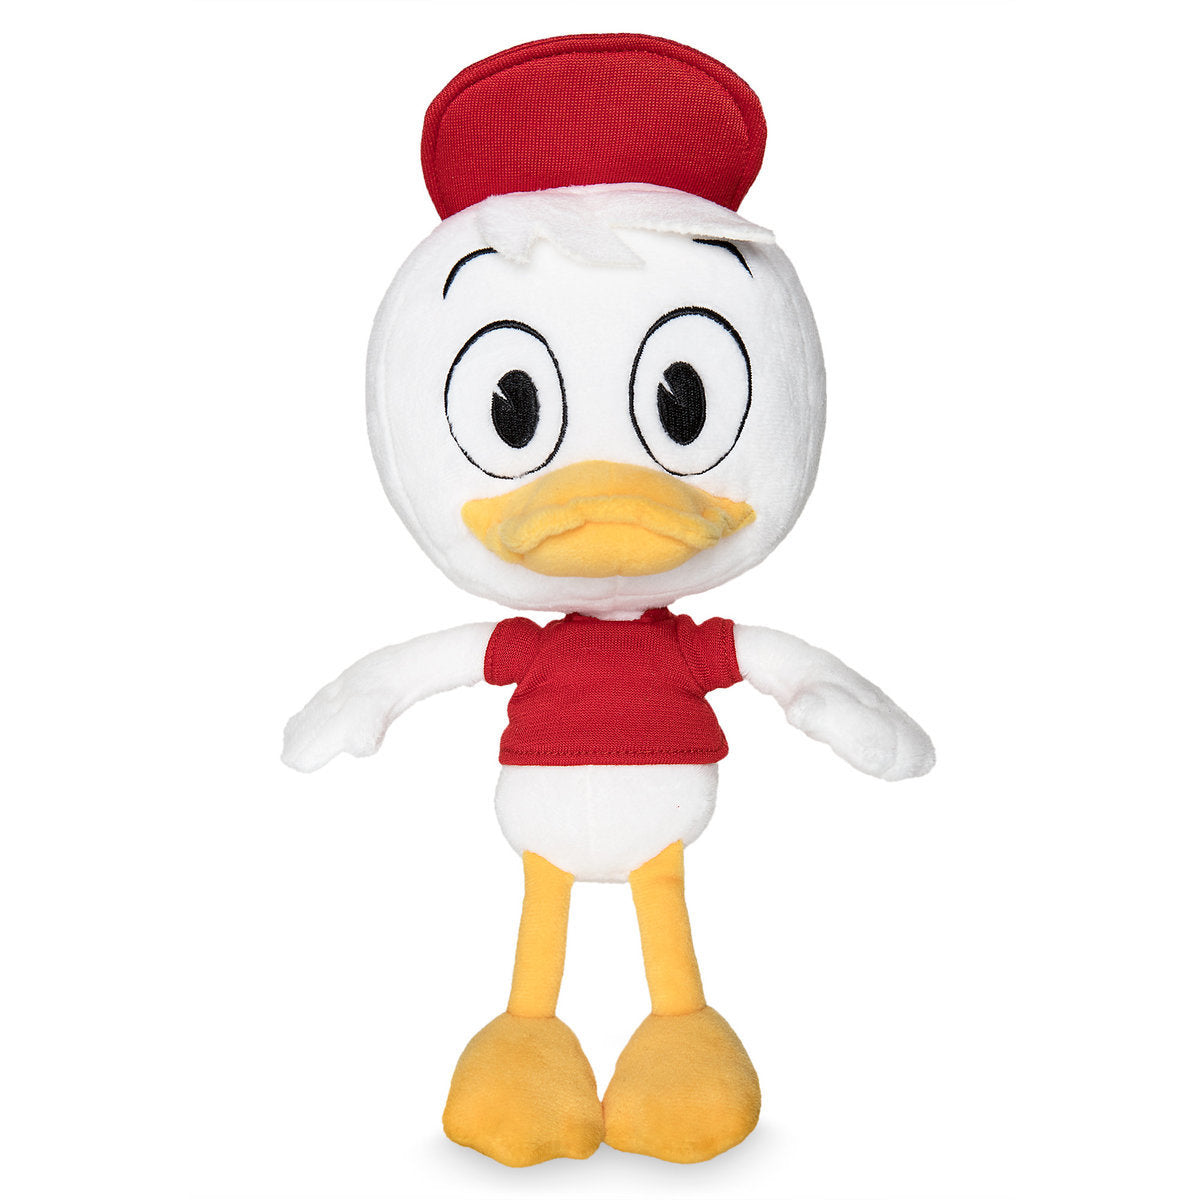 Disney Huey Plush DuckTales Small Toy New with Tags